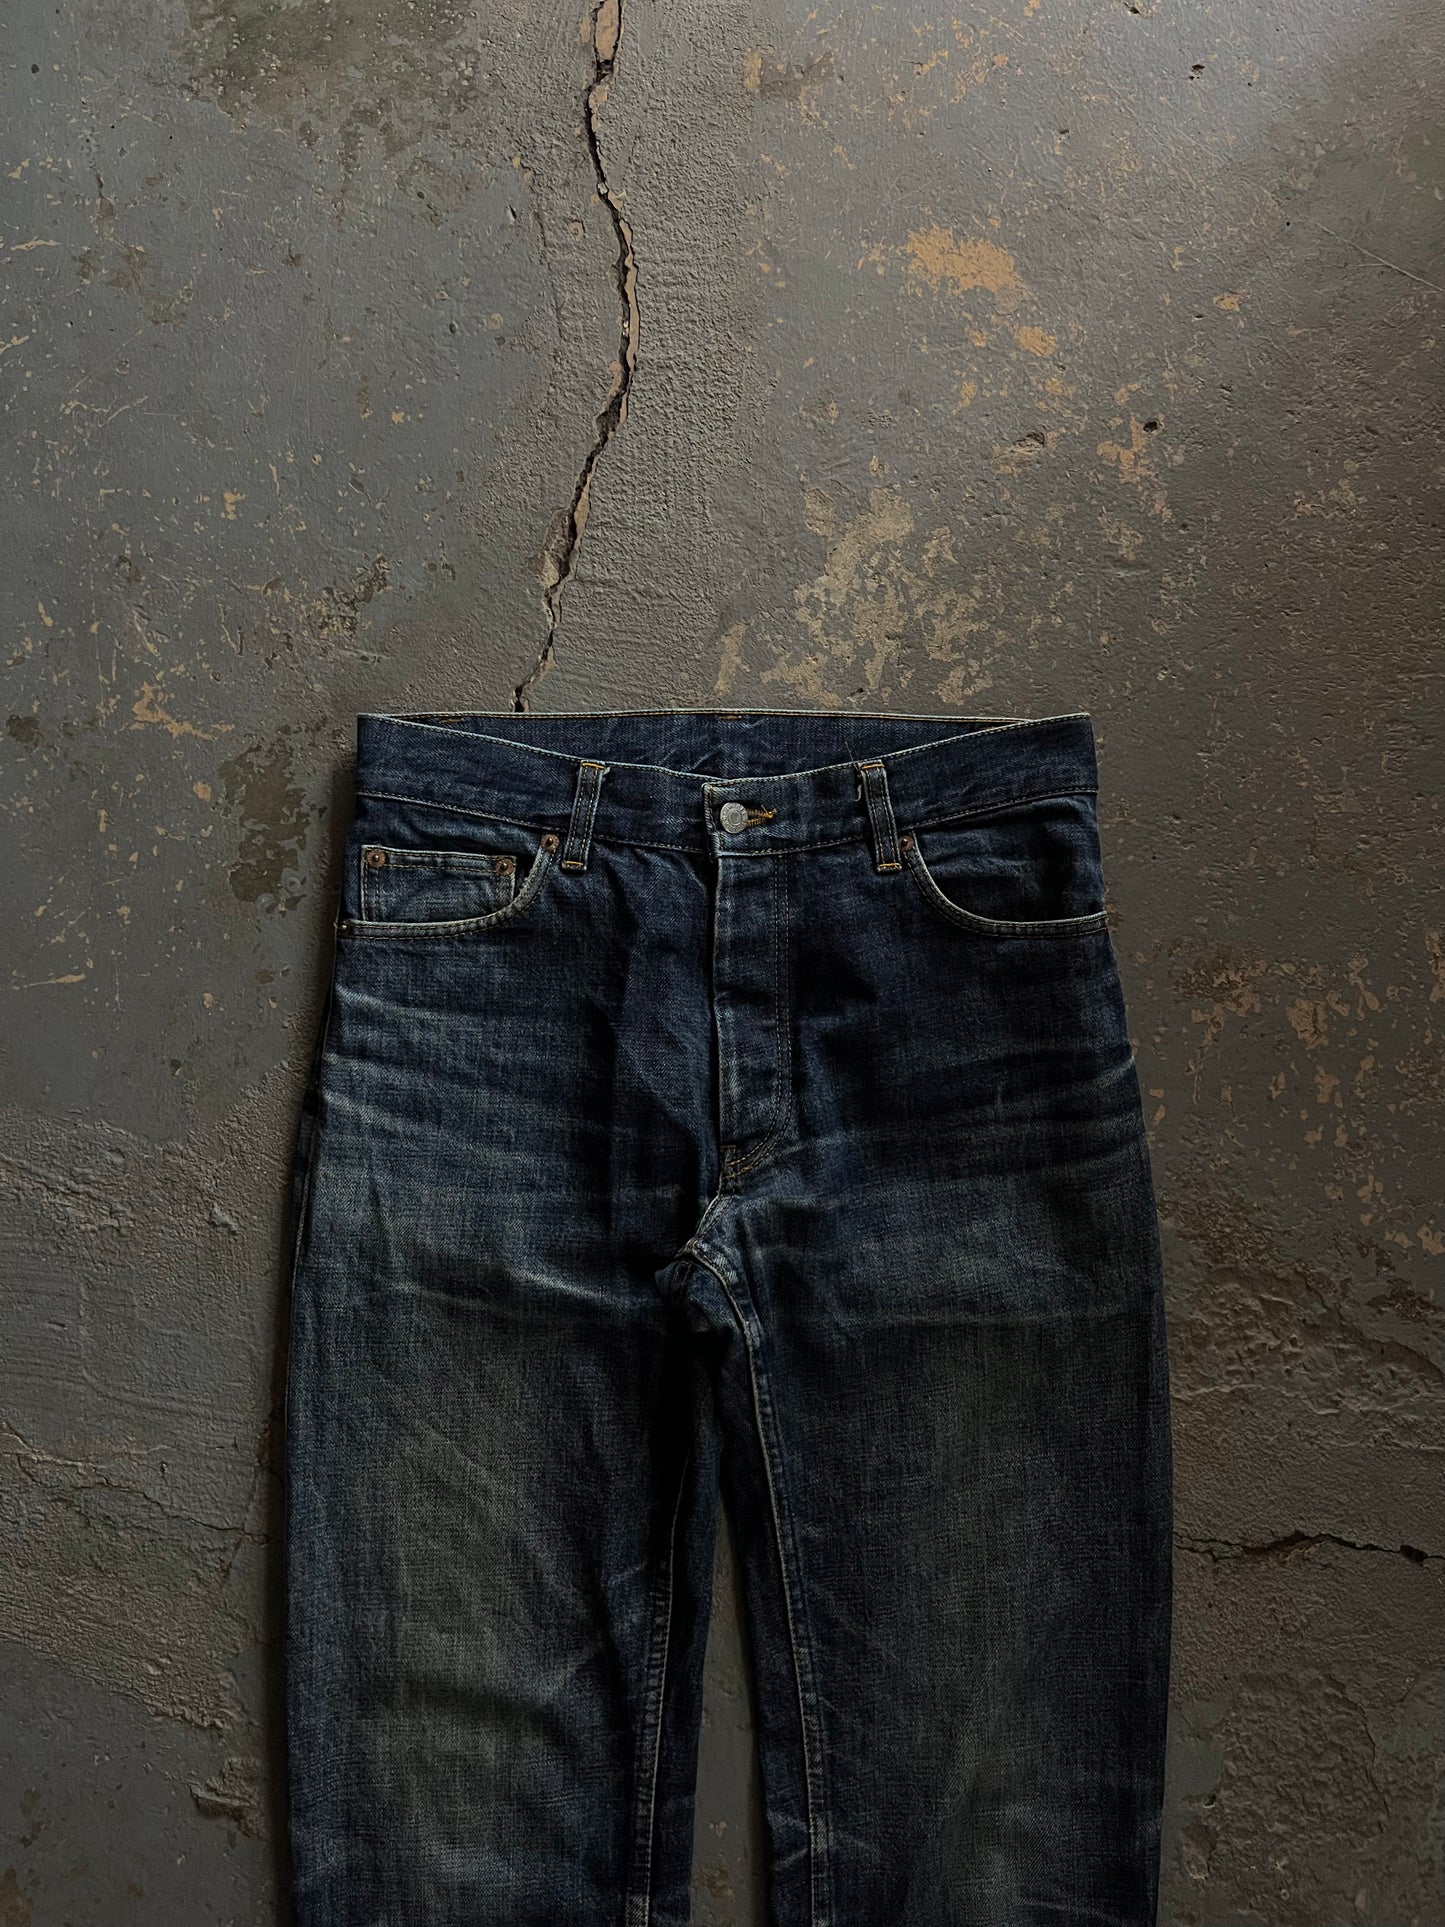 Helmut Lang AW97 Raw Jeans